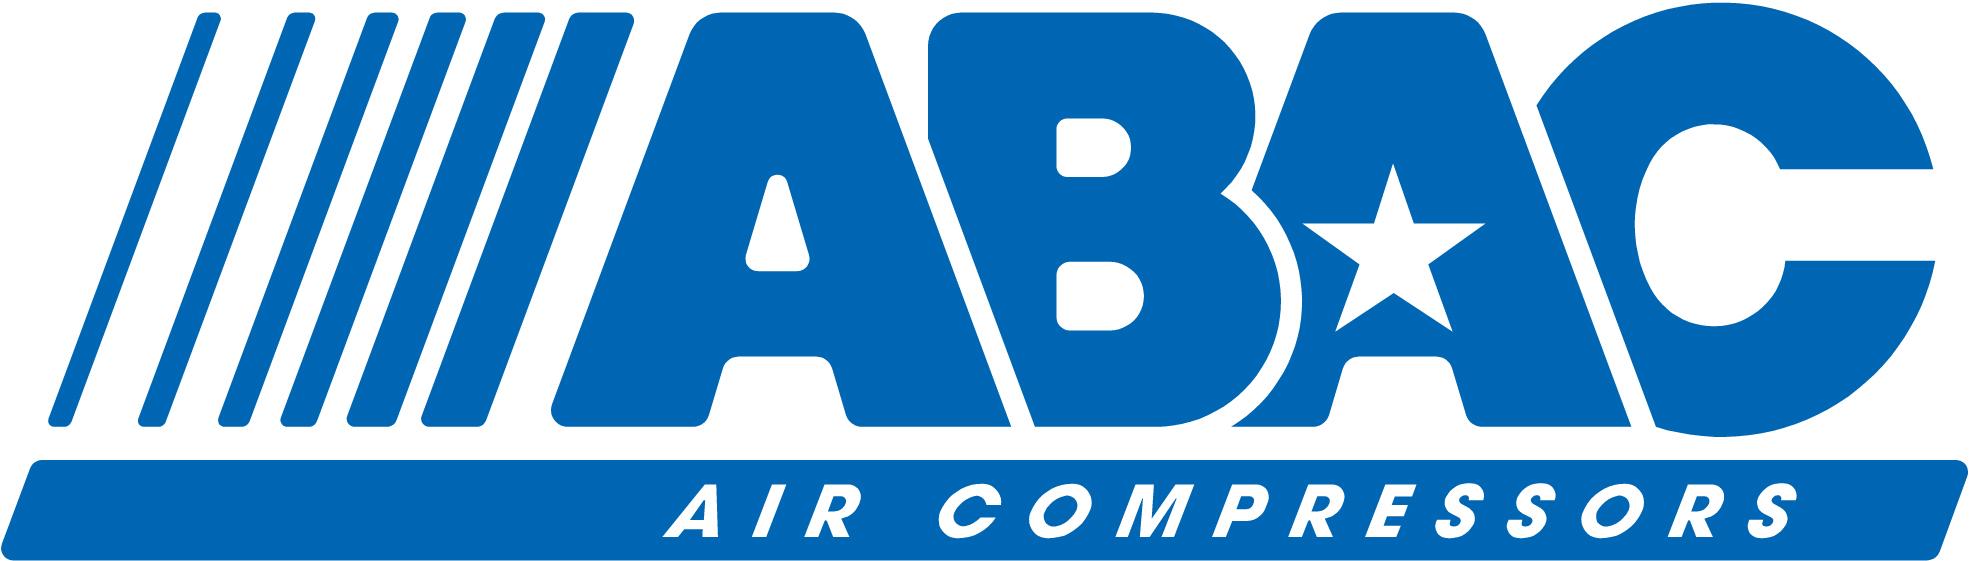 Abac Logo - Logo-ABAC - GEMCO - Experts in the Garage Equipment Industry!